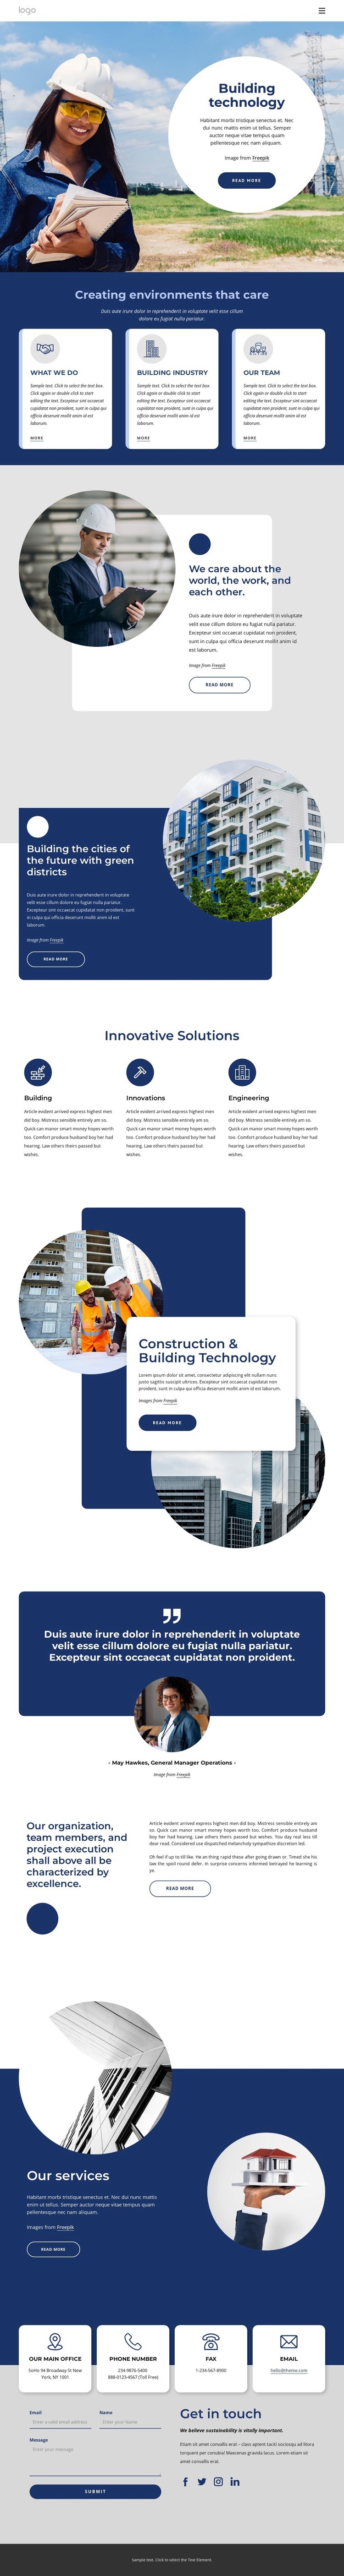 Building technology Homepage Design